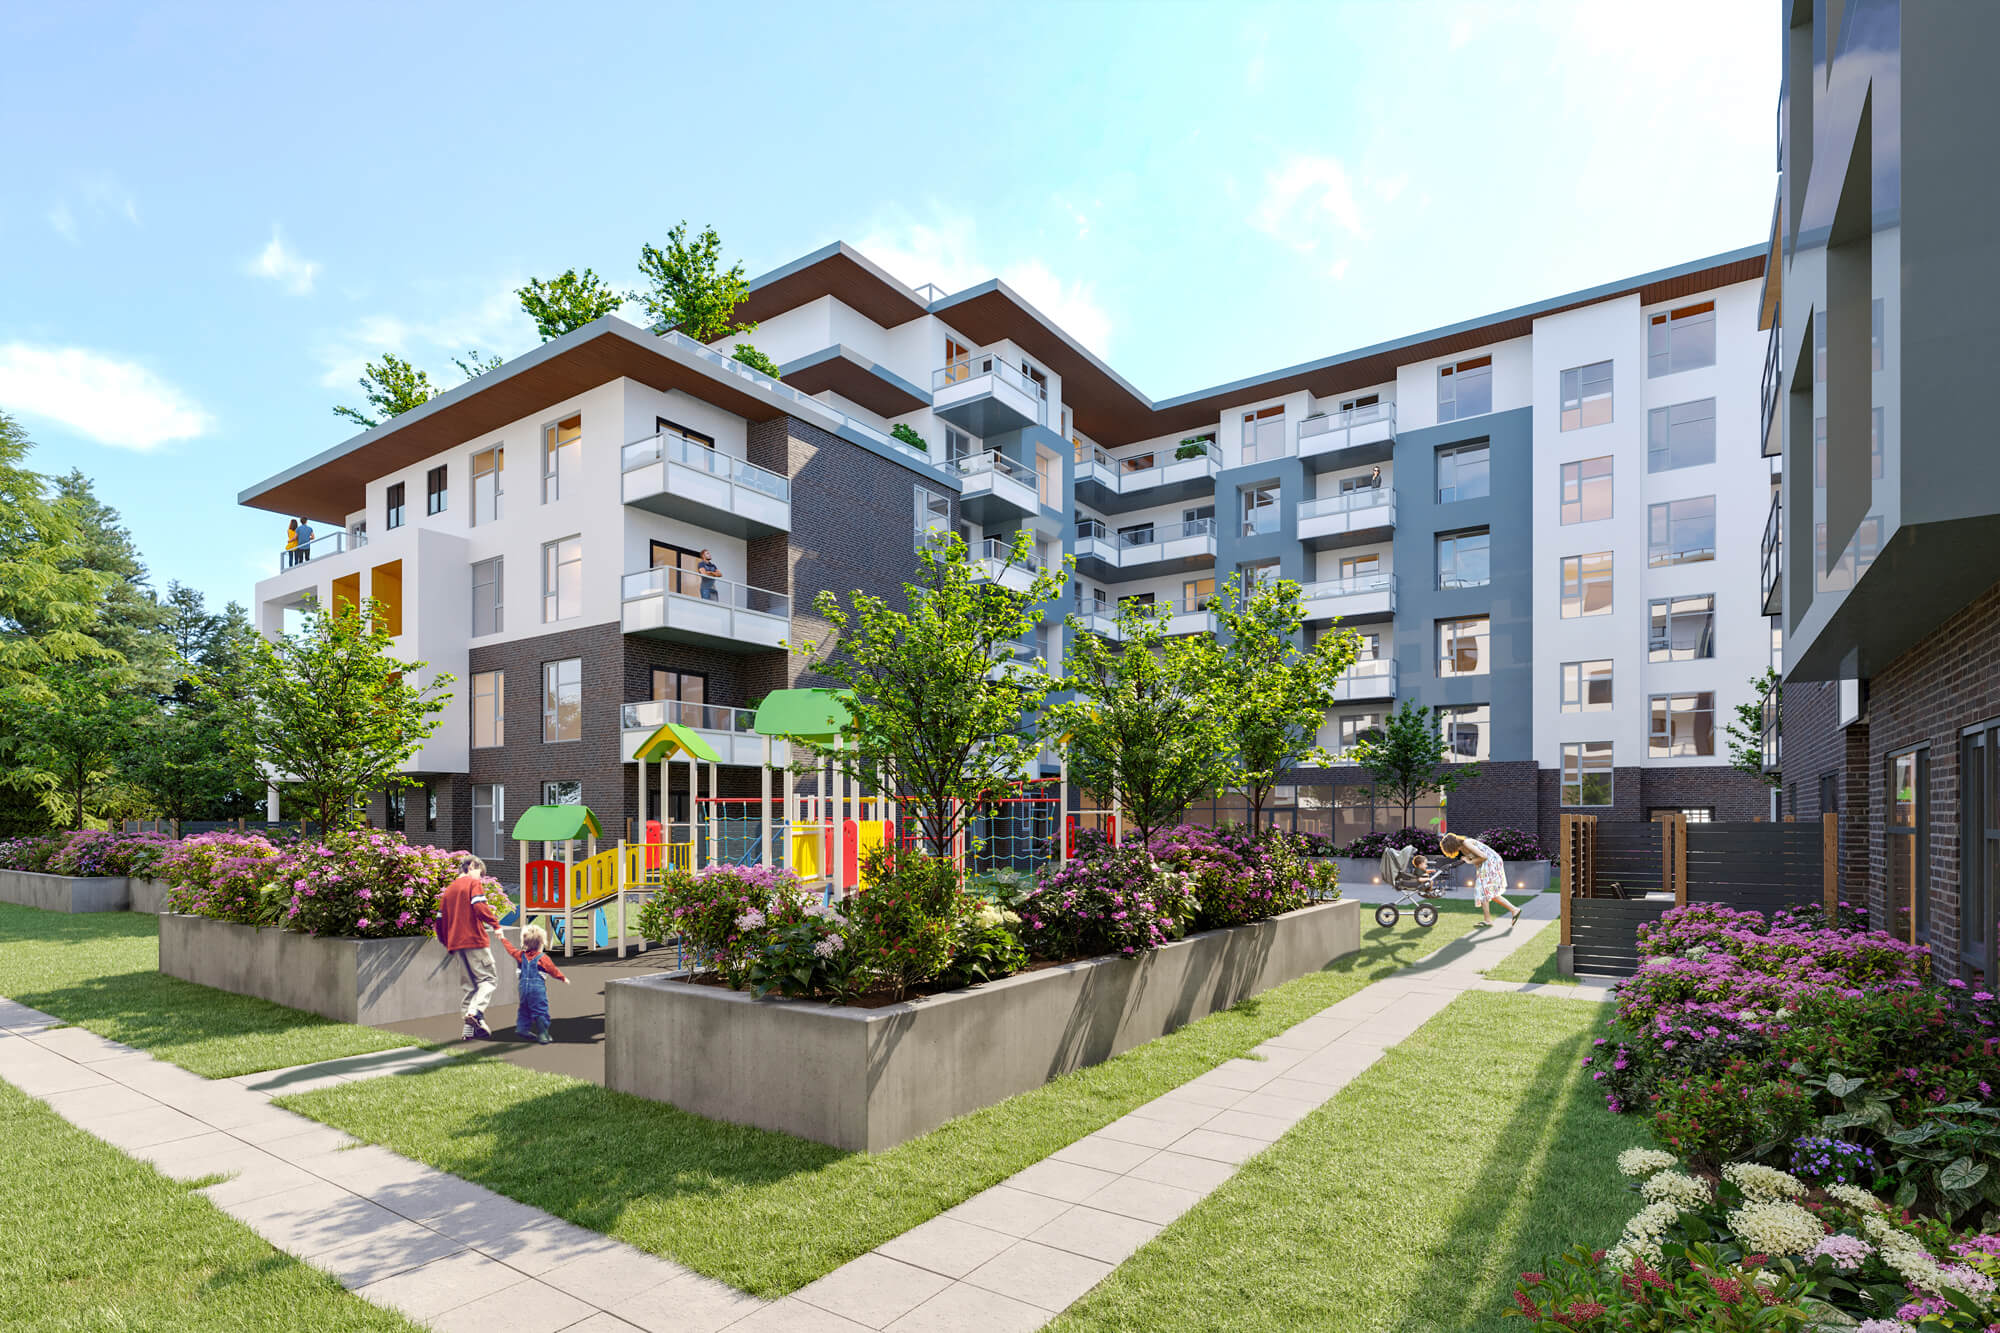 The ‘Viktor’ development is a 6-storey residential condo project in Surrey. Design by Group 161 | DF Architecture.